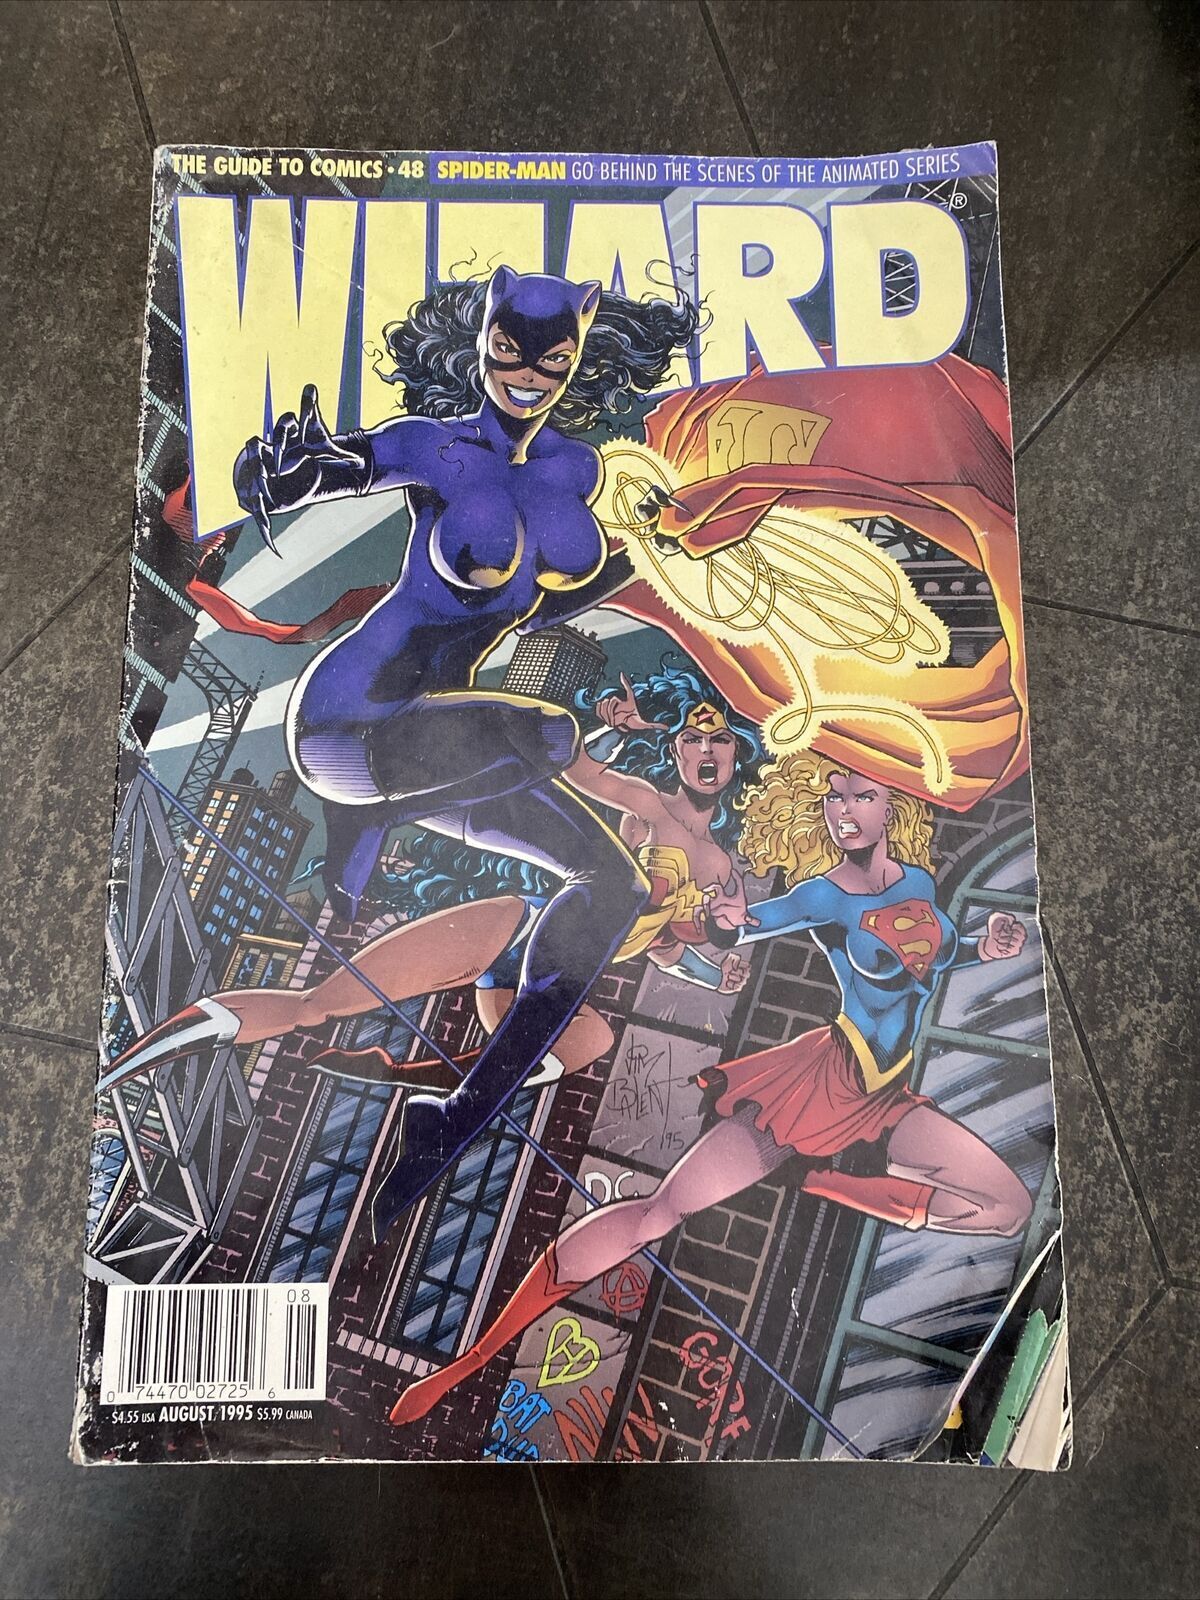 Wizard The Guide To Comics Magazine #48 August 1995 Cat Woman Wonder Woman